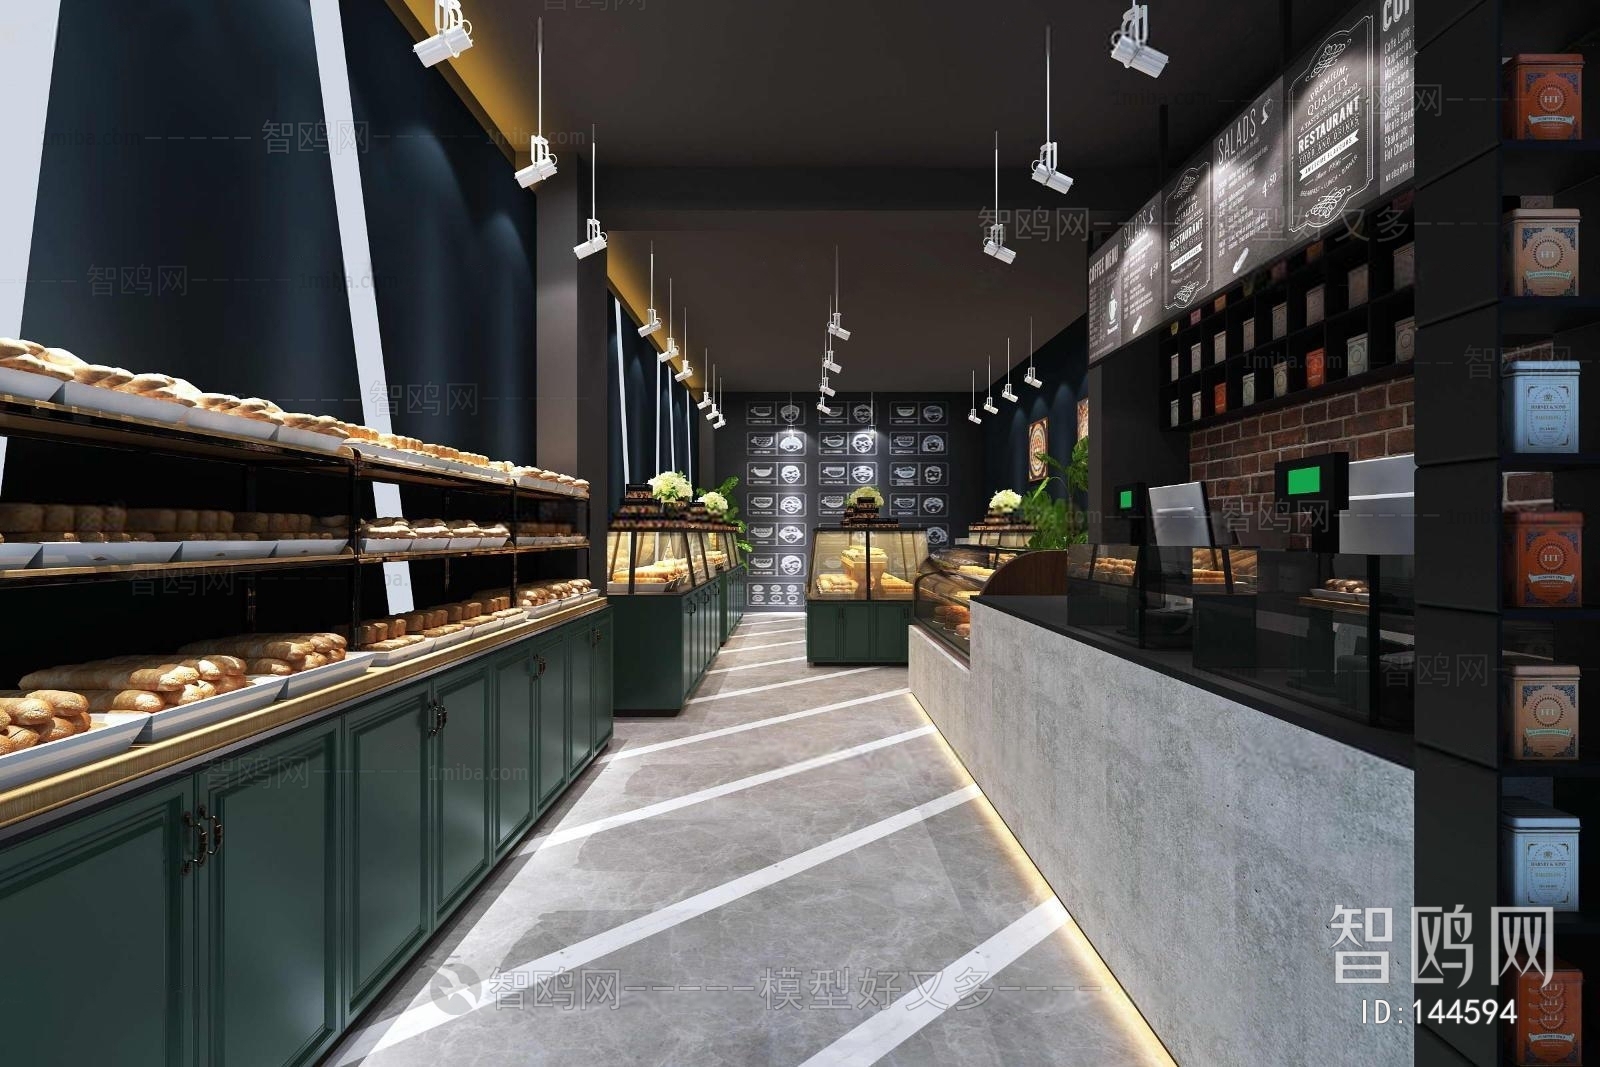 Industrial Style Bakery